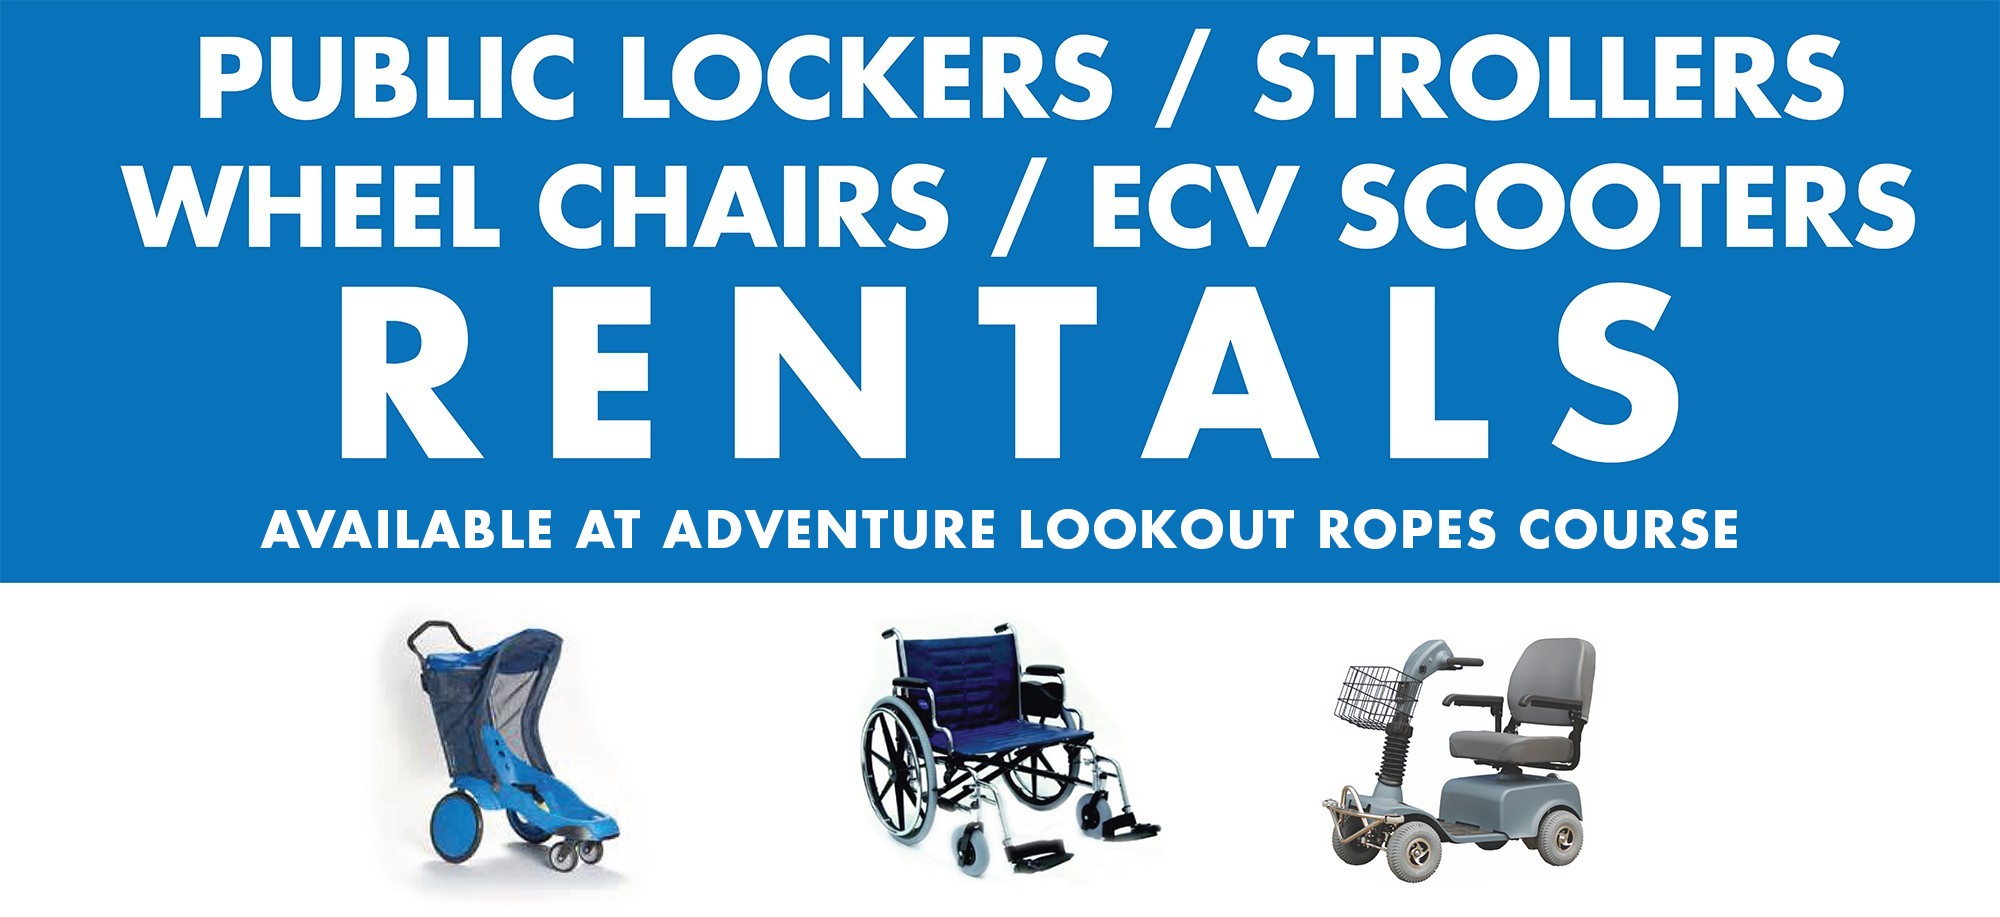 Public Lockers, Strollers, Wheel Chair, and ECV Scooter Rentals. Available at Adventure Lookout Ropes Course